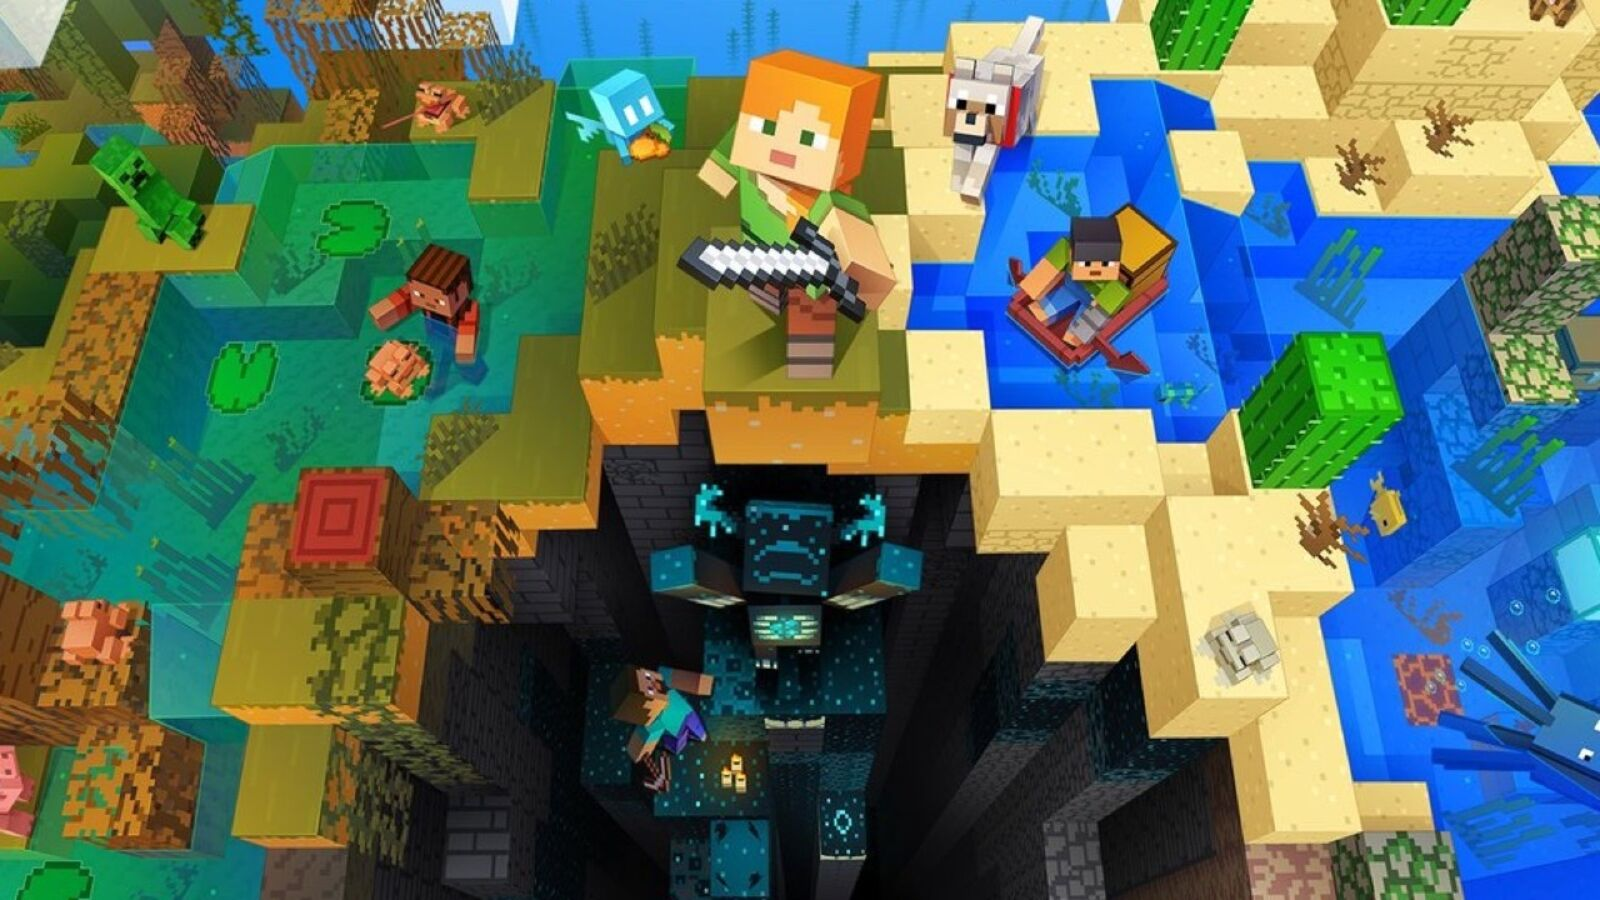 295k Minecraft fans criticise lack of new content in Stop the Mob Vote  petition